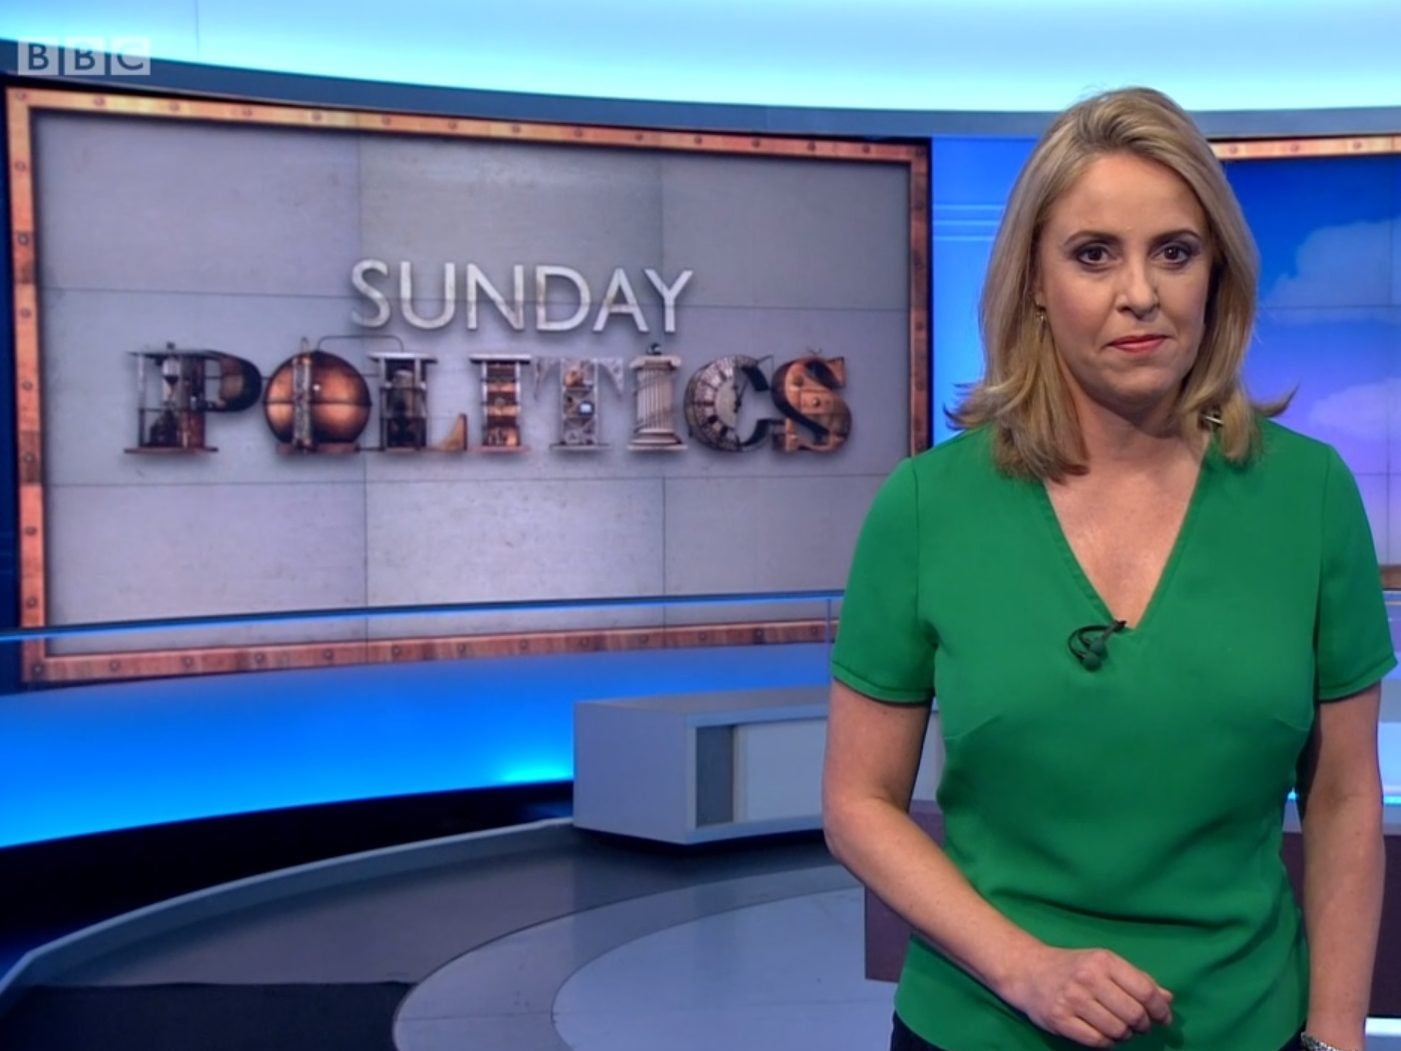 BBC turns Sunday Politics into regional half-hour show and replaces Daily Politics in bid to boost digital coverage and make £1.9m savings